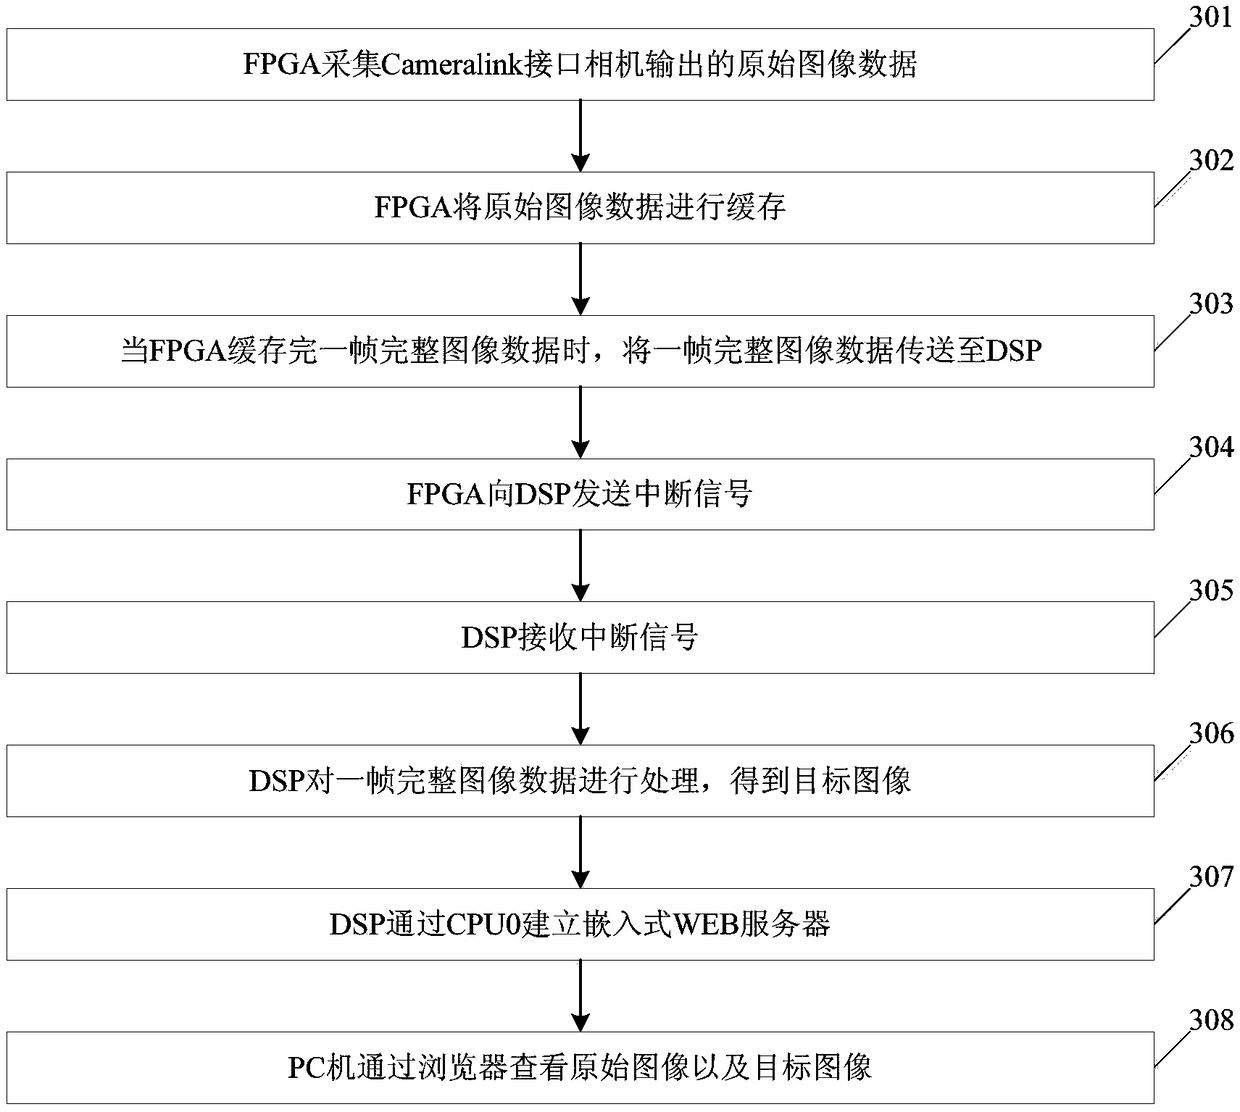 Camera image collecting and processing method and system based on FPGA (Field Programmable Gate Array)+DSP (Digital Signal Processor) architecture